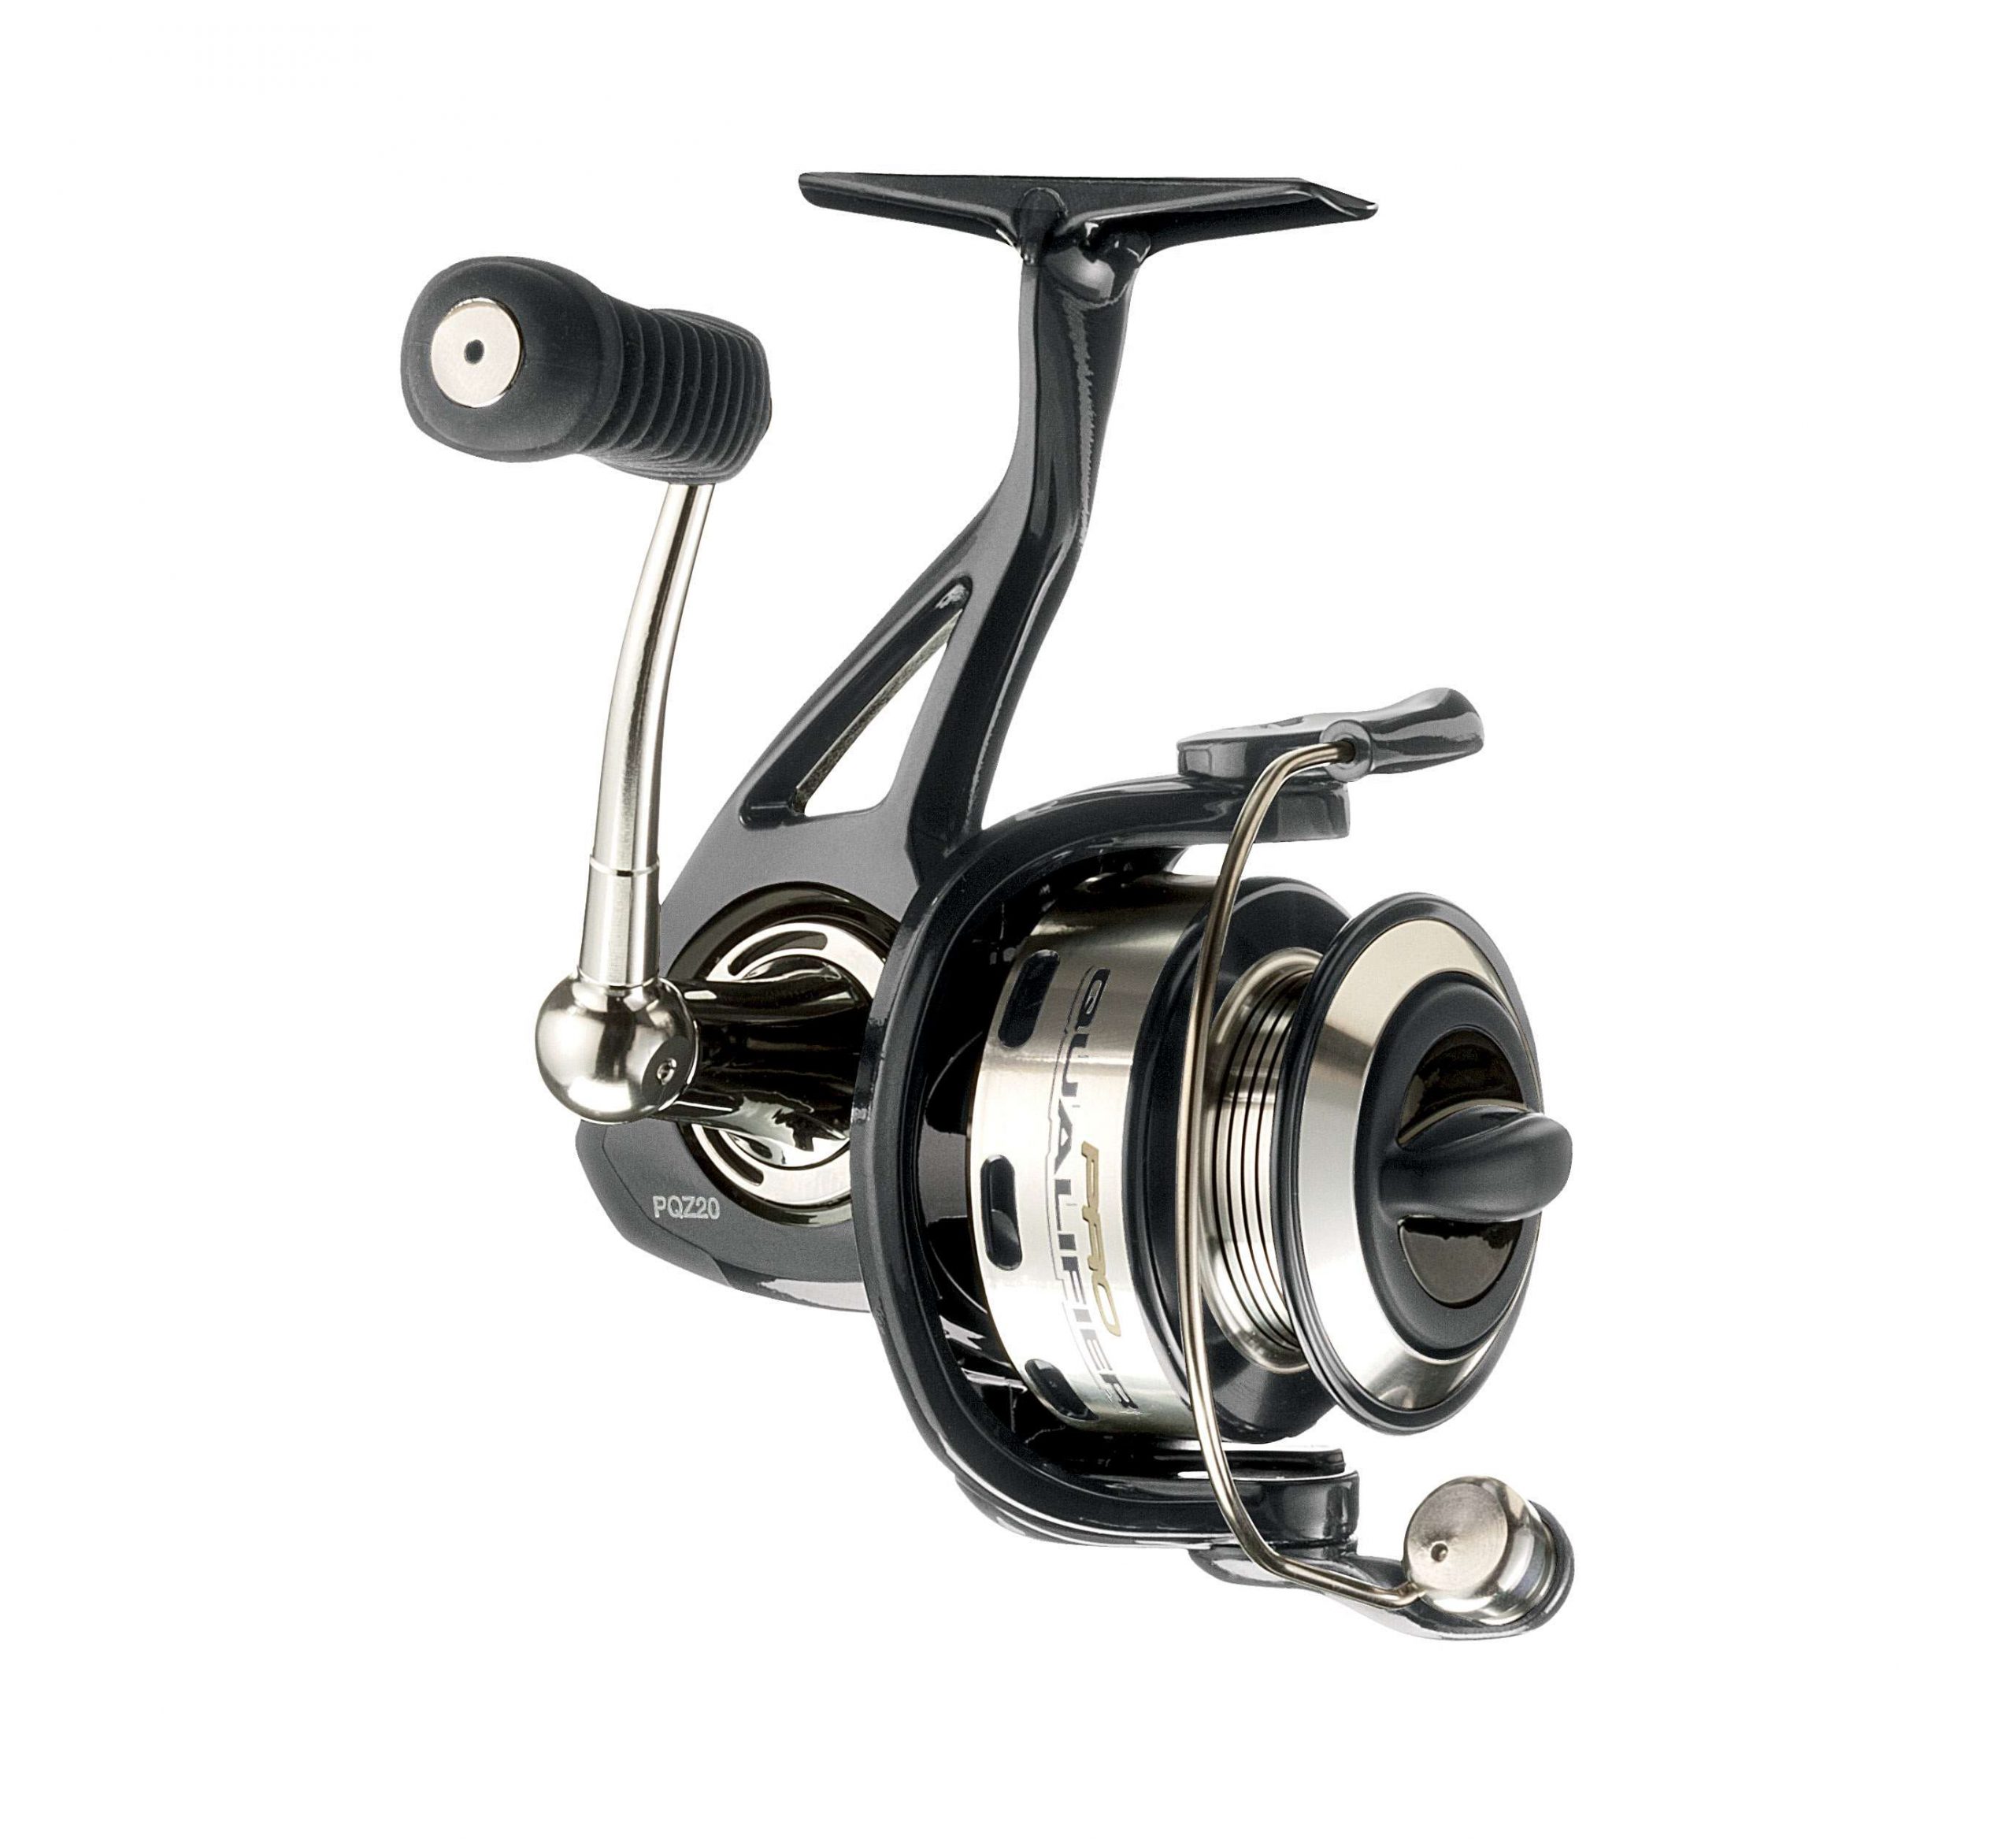 <B>BASS PRO SHOPS PRO QUALIFIER SPINNING REEL</b>
If you are sick of line twist with spinning reels, this product may become your new best friend. The new Pro Qualifier features an oversized, tapered steel roller and a 30-percent wider spool to reduce twist and provide better line lay. The end results are longer casts and no more hassle. Plus, the new design includes a skeletonized rotor, spool and frame for resistance-free performance and weight savings. Retail price will be $79.99.